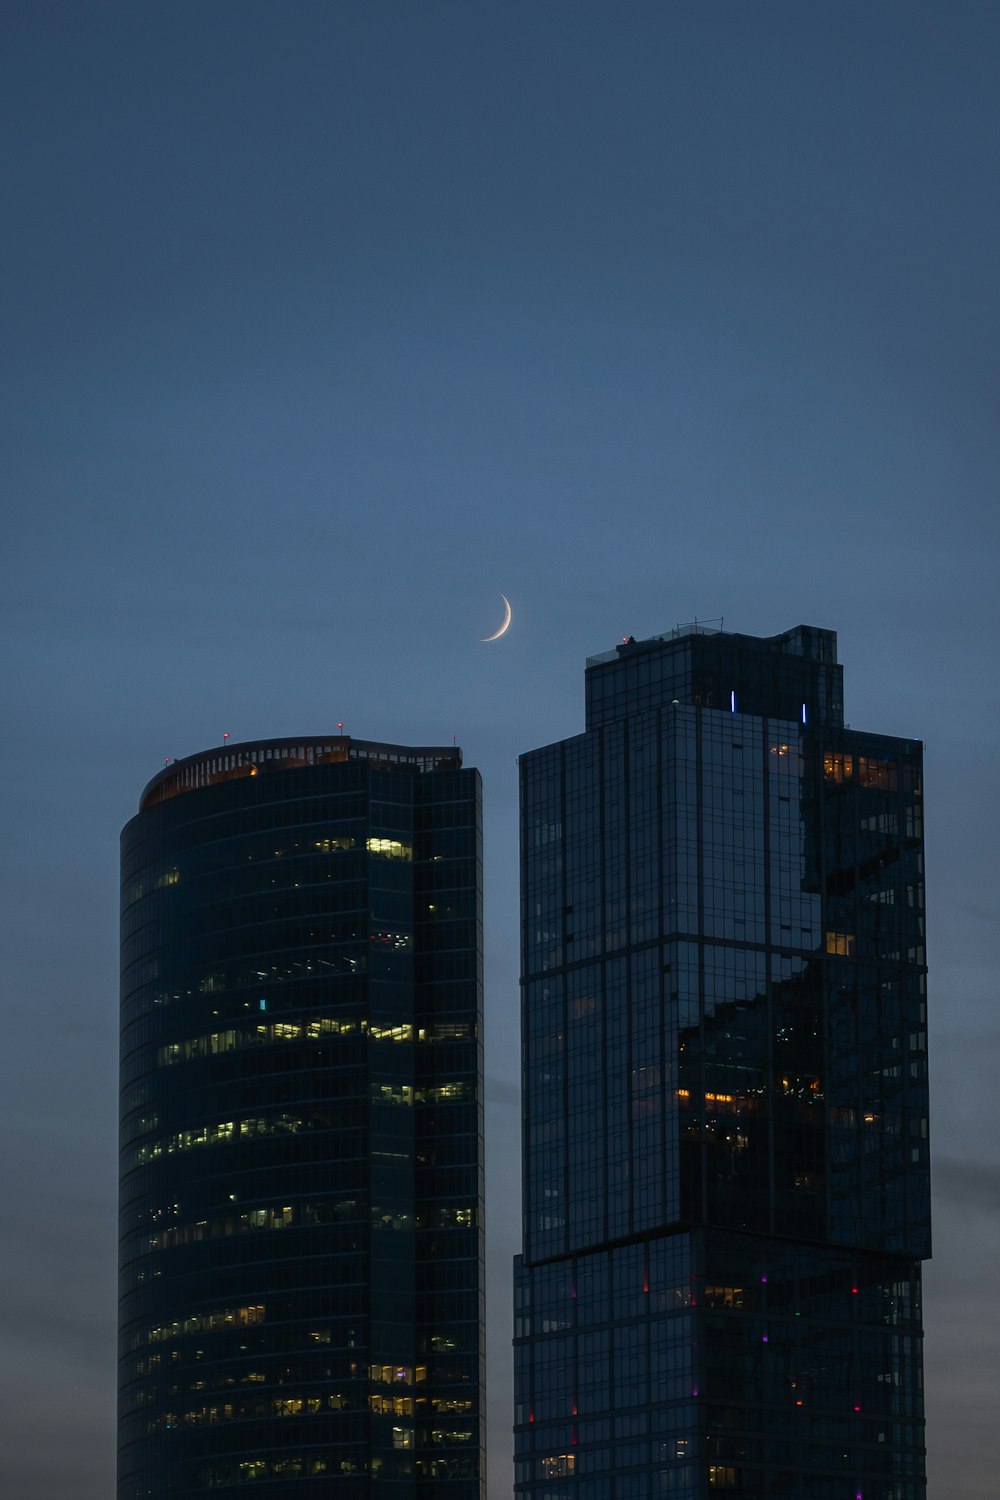 two skyscrapers at night with the moon in the sky